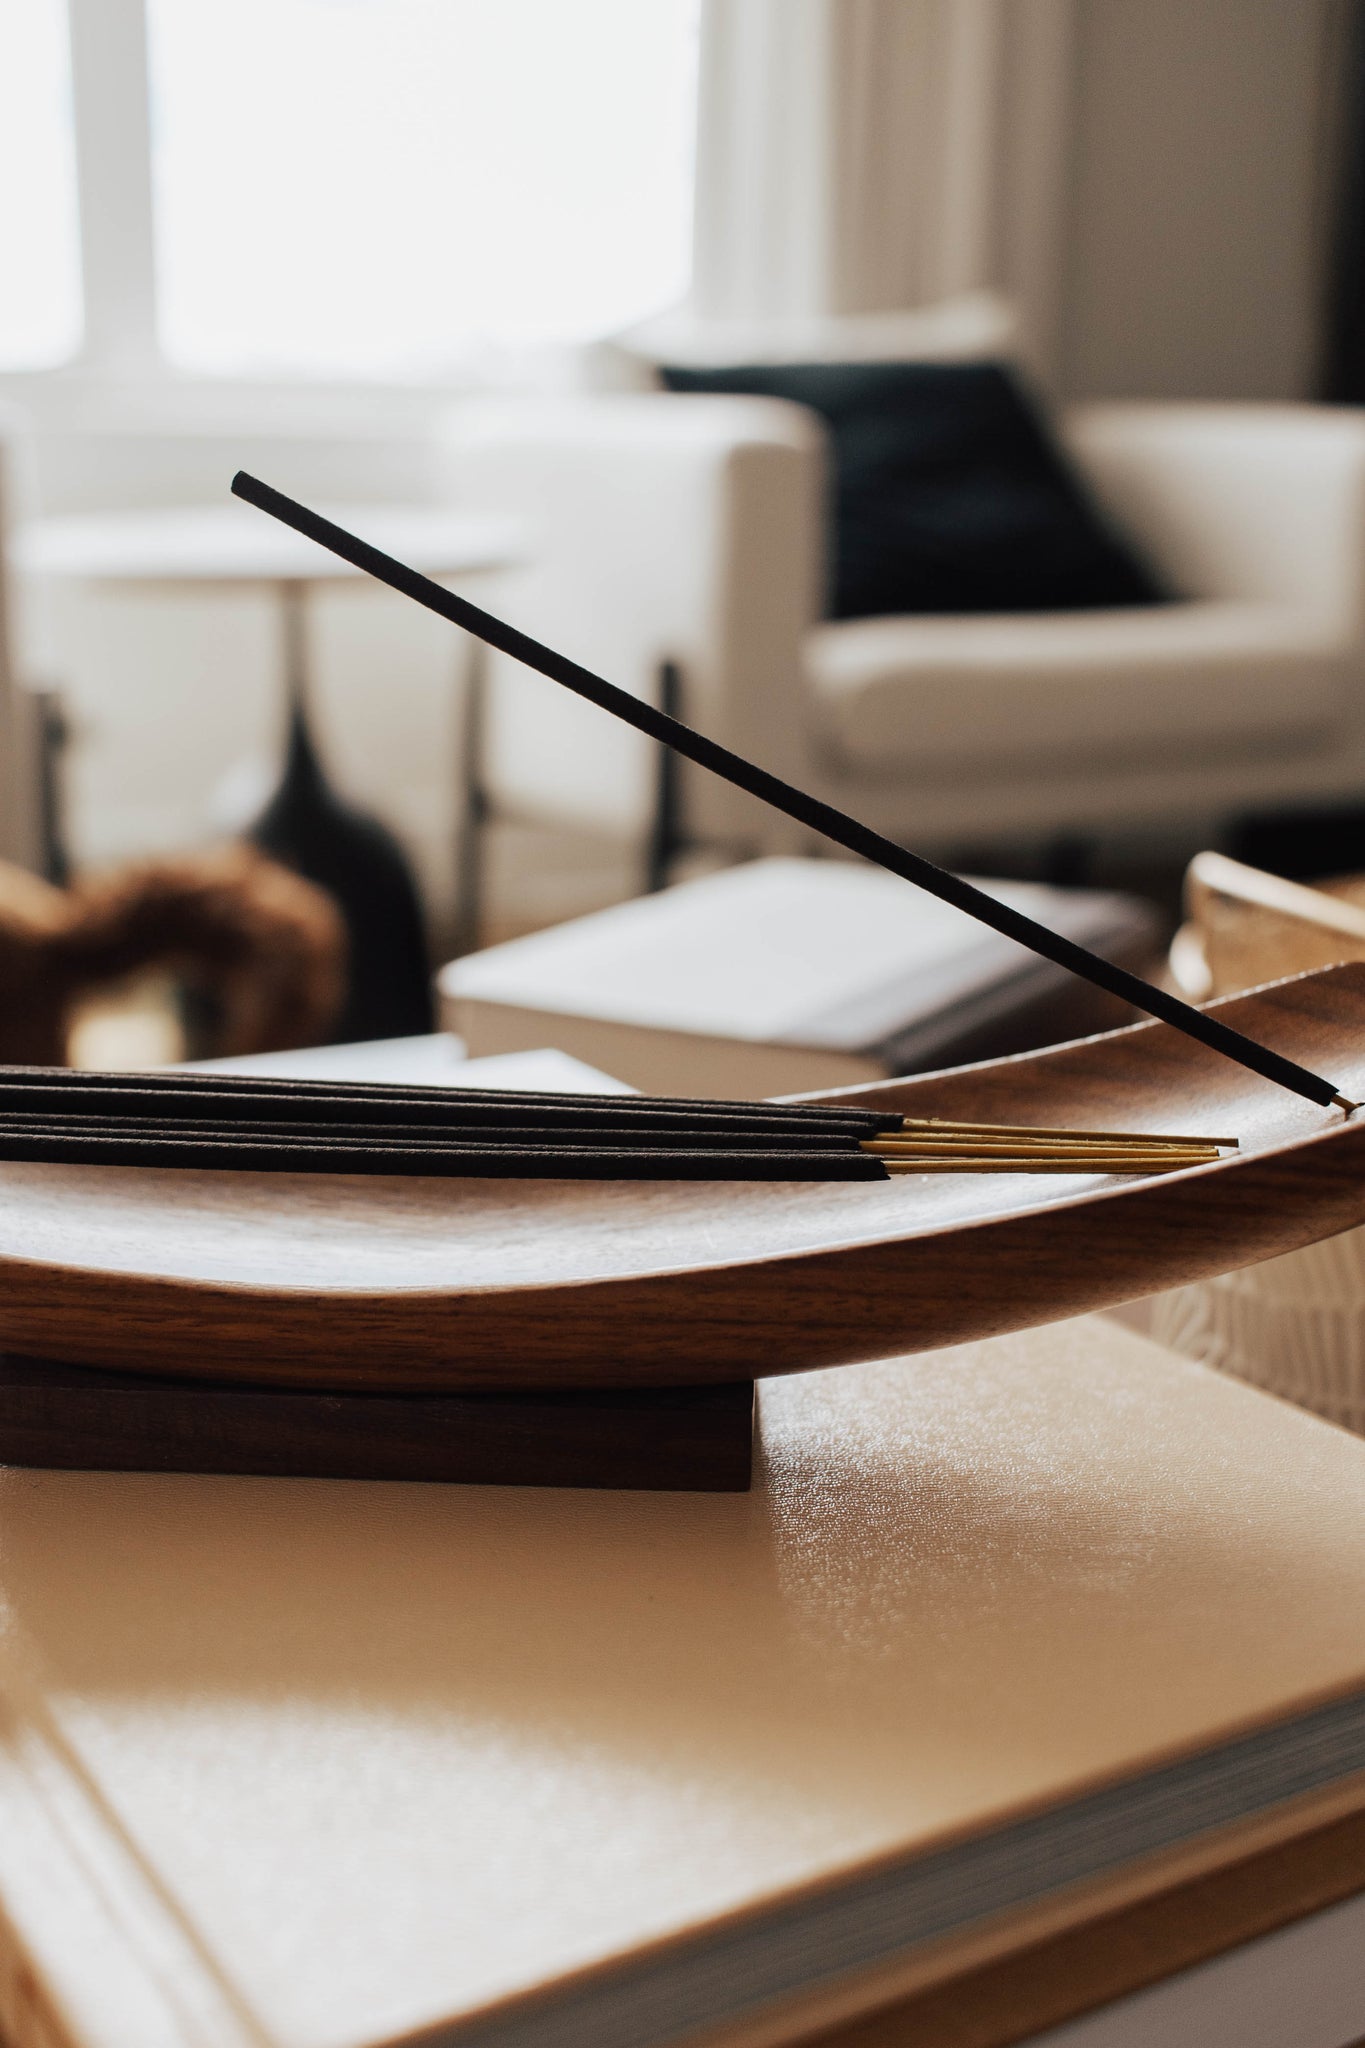 Elevate Your Incense Experience with Our Unique Rosewood Incense Holder - A Family-Crafted Masterpiece